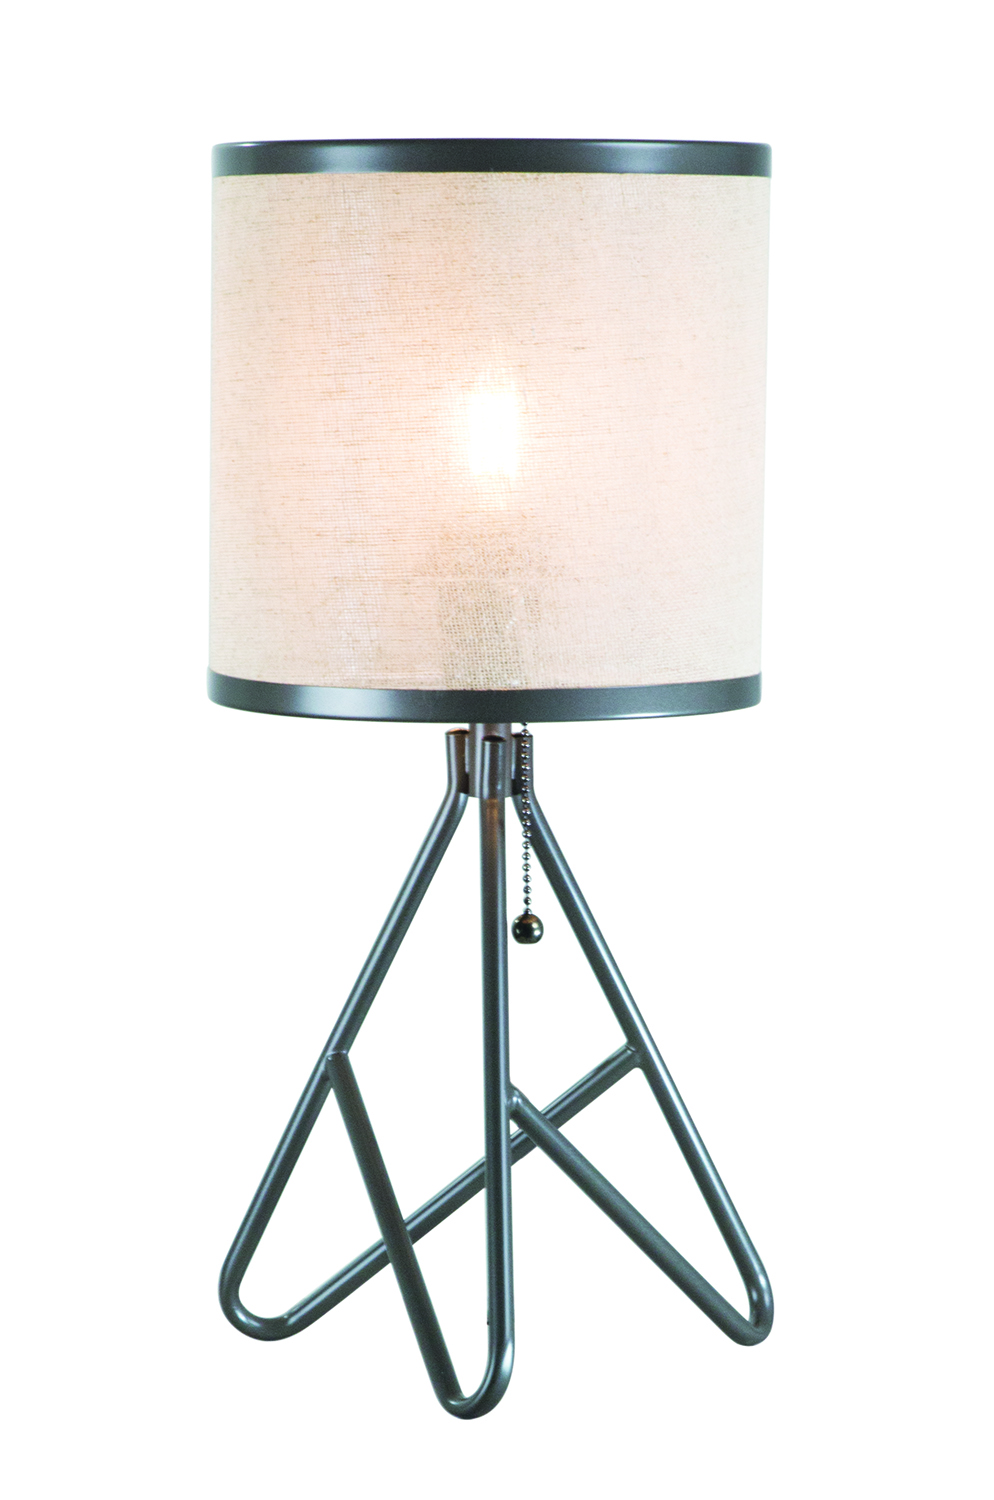 M3200TP Table lamp by anthony california inc